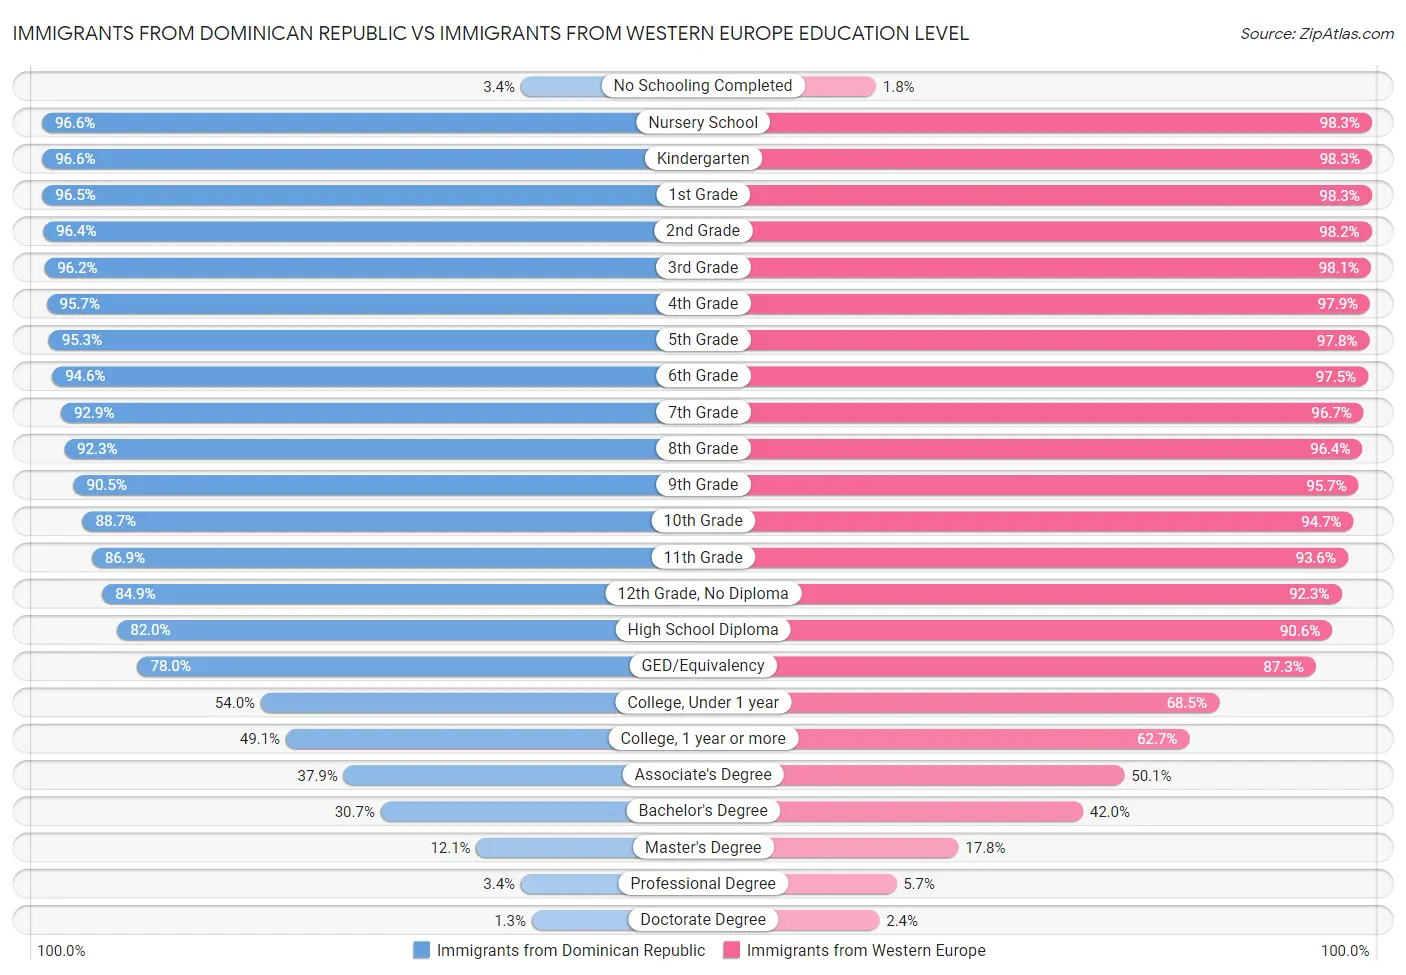 Immigrants from Dominican Republic vs Immigrants from Western Europe Education Level